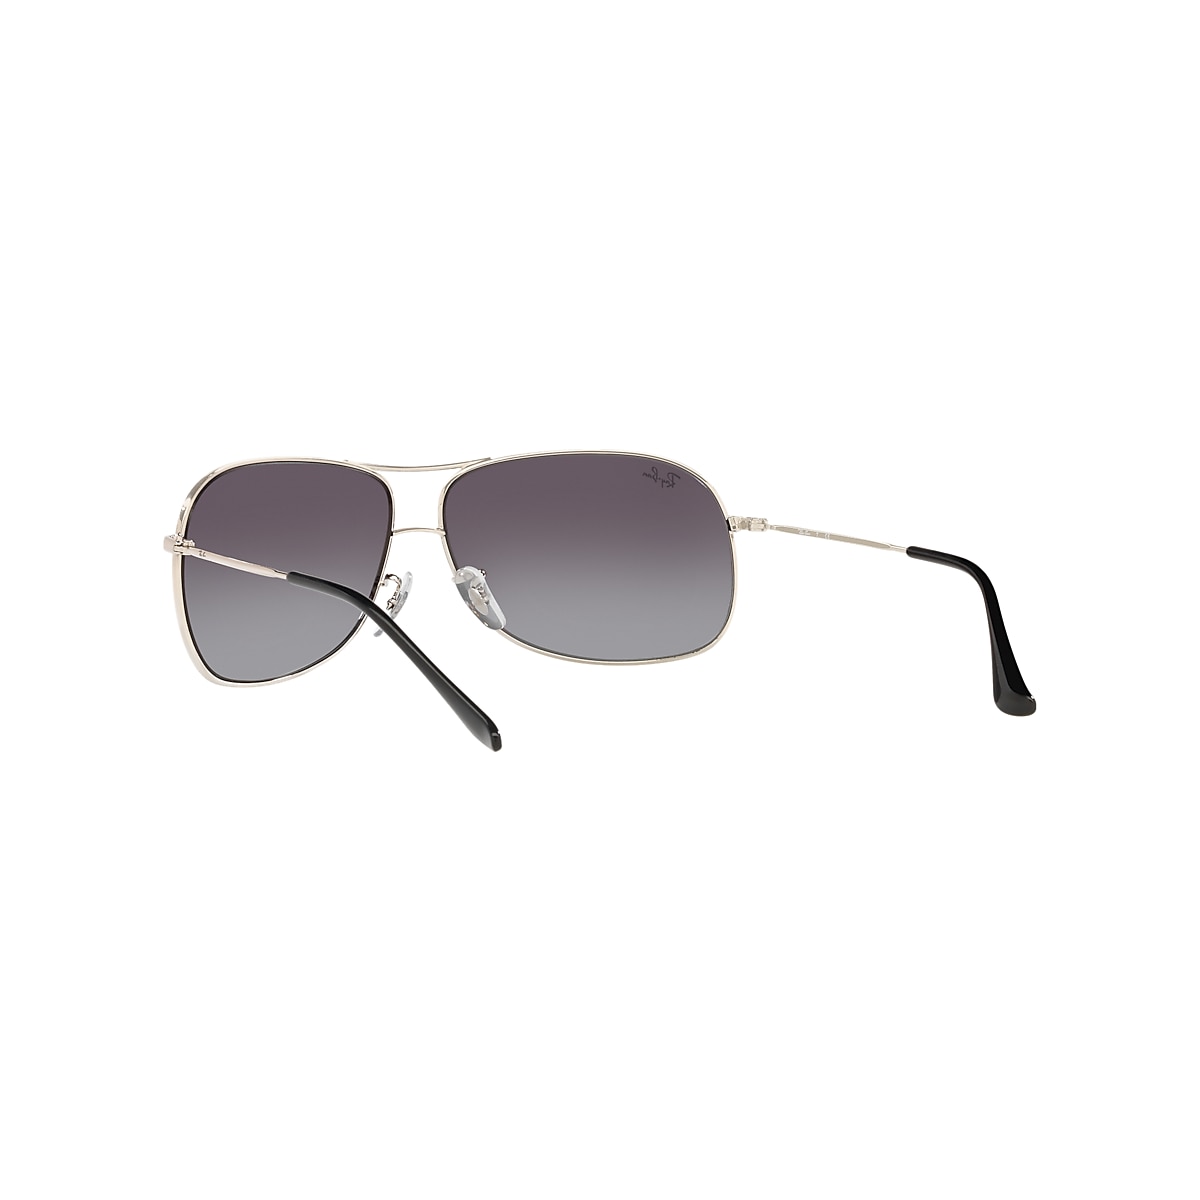 RB3267 Sunglasses in Silver and Grey - RB3267 | Ray-Ban® US